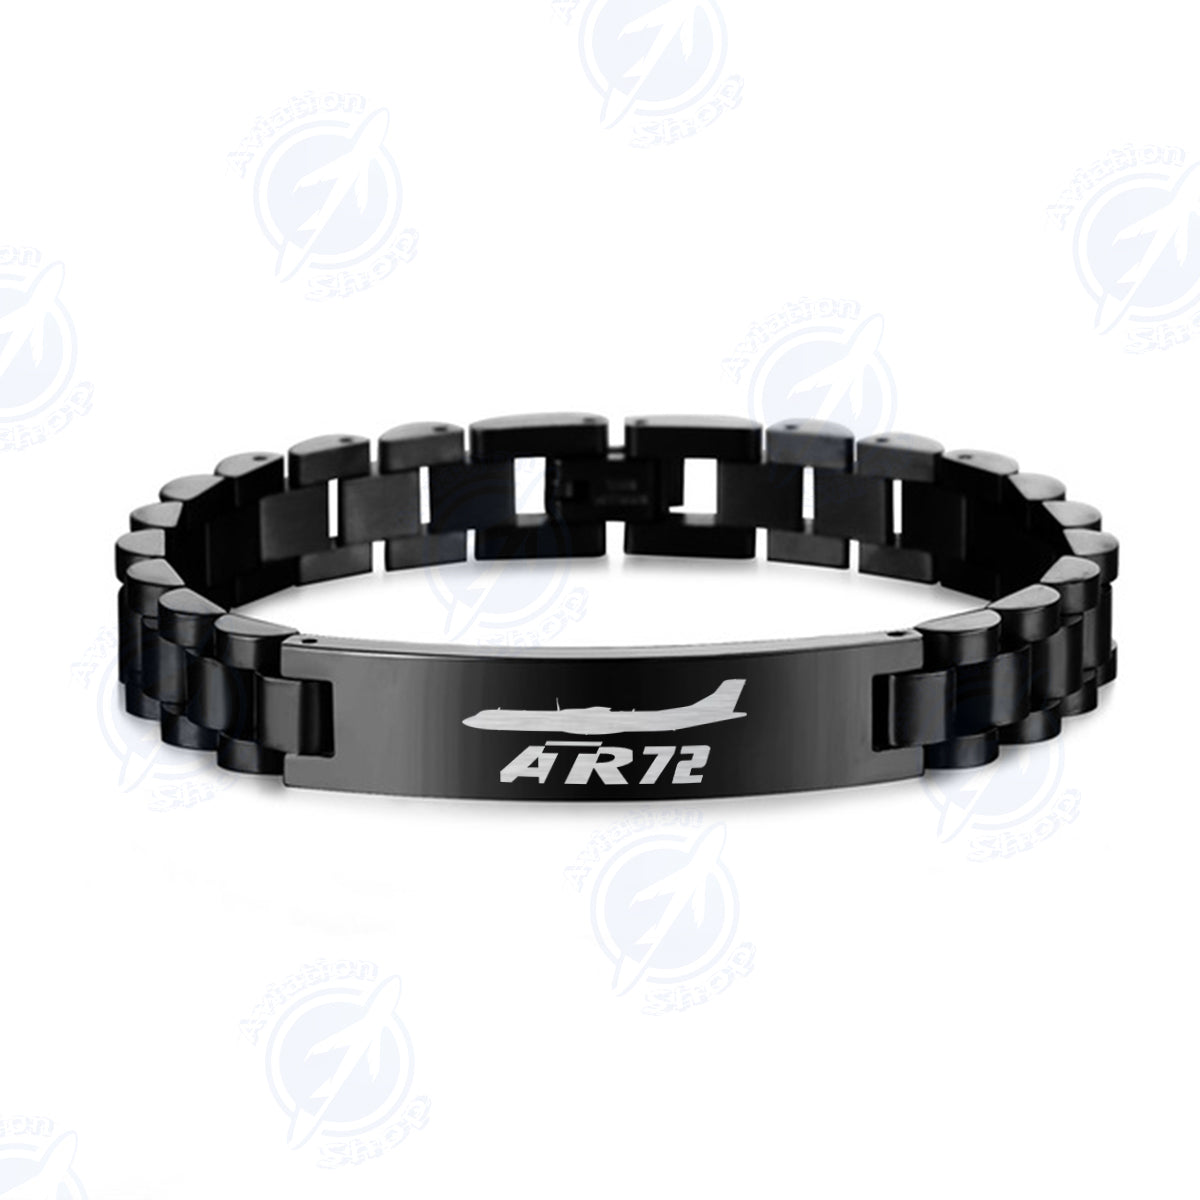 The ATR72 Designed Stainless Steel Chain Bracelets